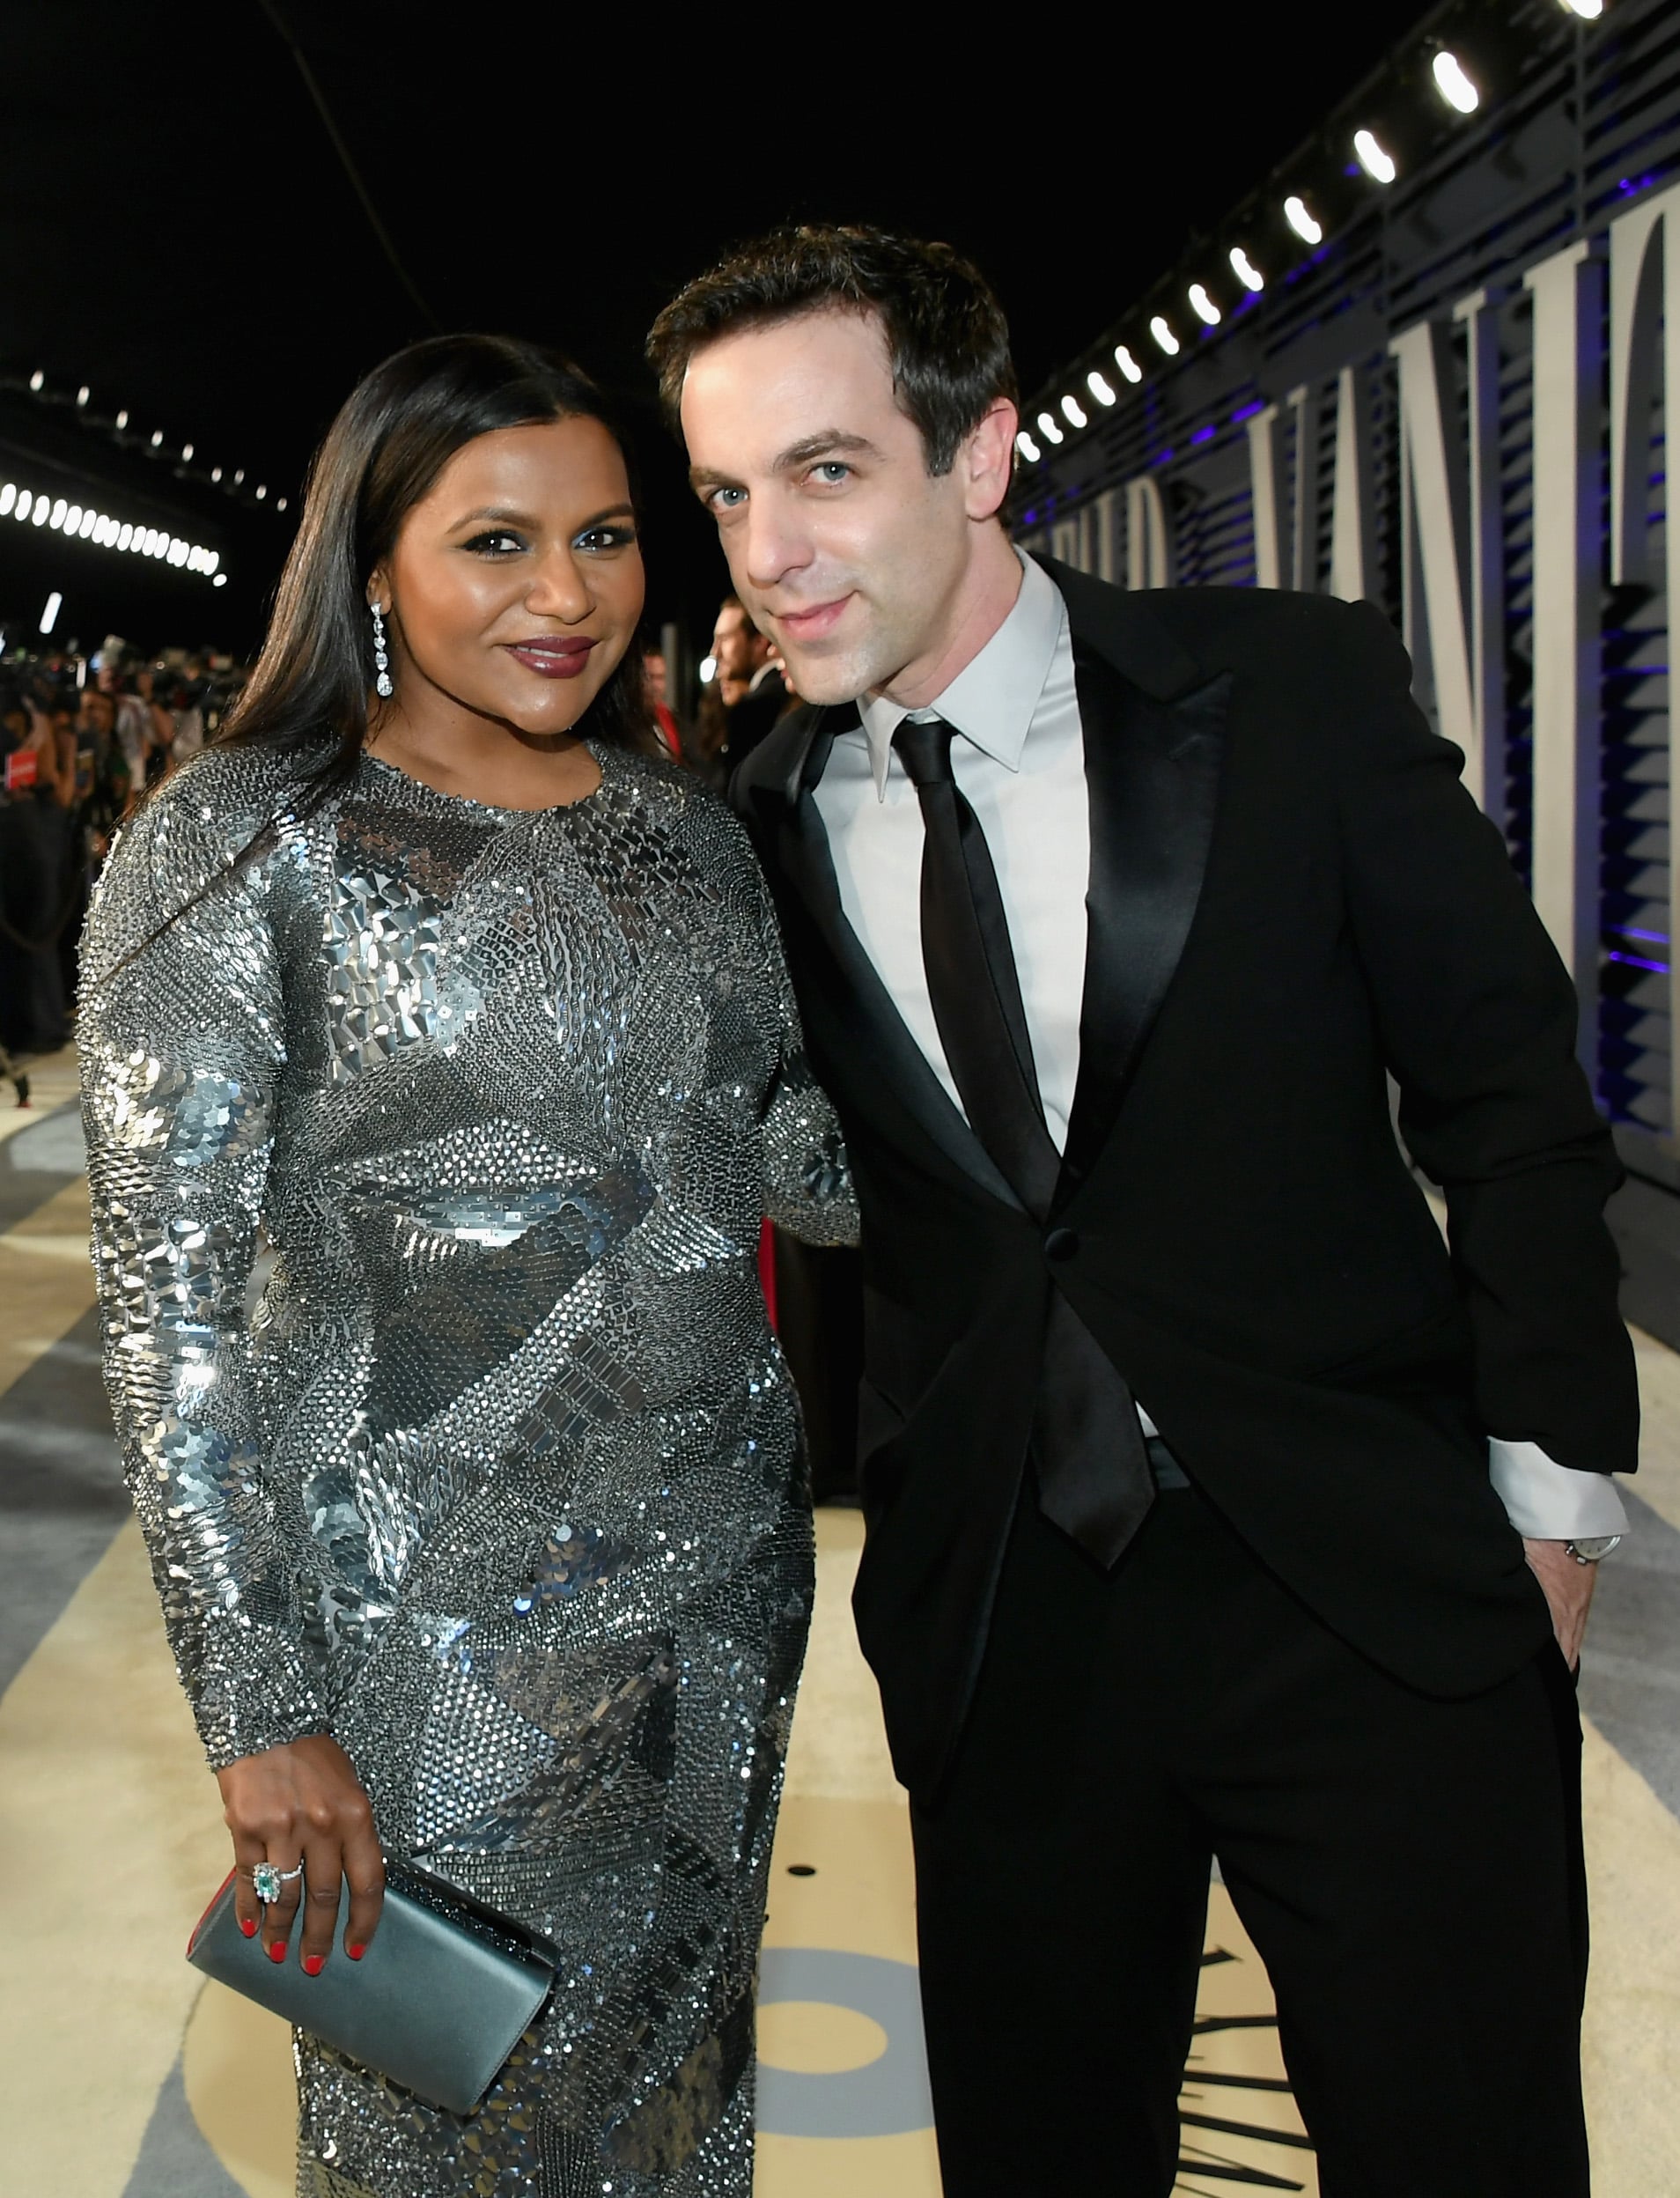 BEVERLY HILLS, CA - FEBRUARY 24:  Mindy Kaling (L) and B. J. Novak attend the 2019 Vanity Fair Oscar Party hosted by Radhika Jones at Wallis Annenberg Center for the Performing Arts on February 24, 2019 in Beverly Hills, California.  (Photo by Mike Coppola/VF19/Getty Images for VF)